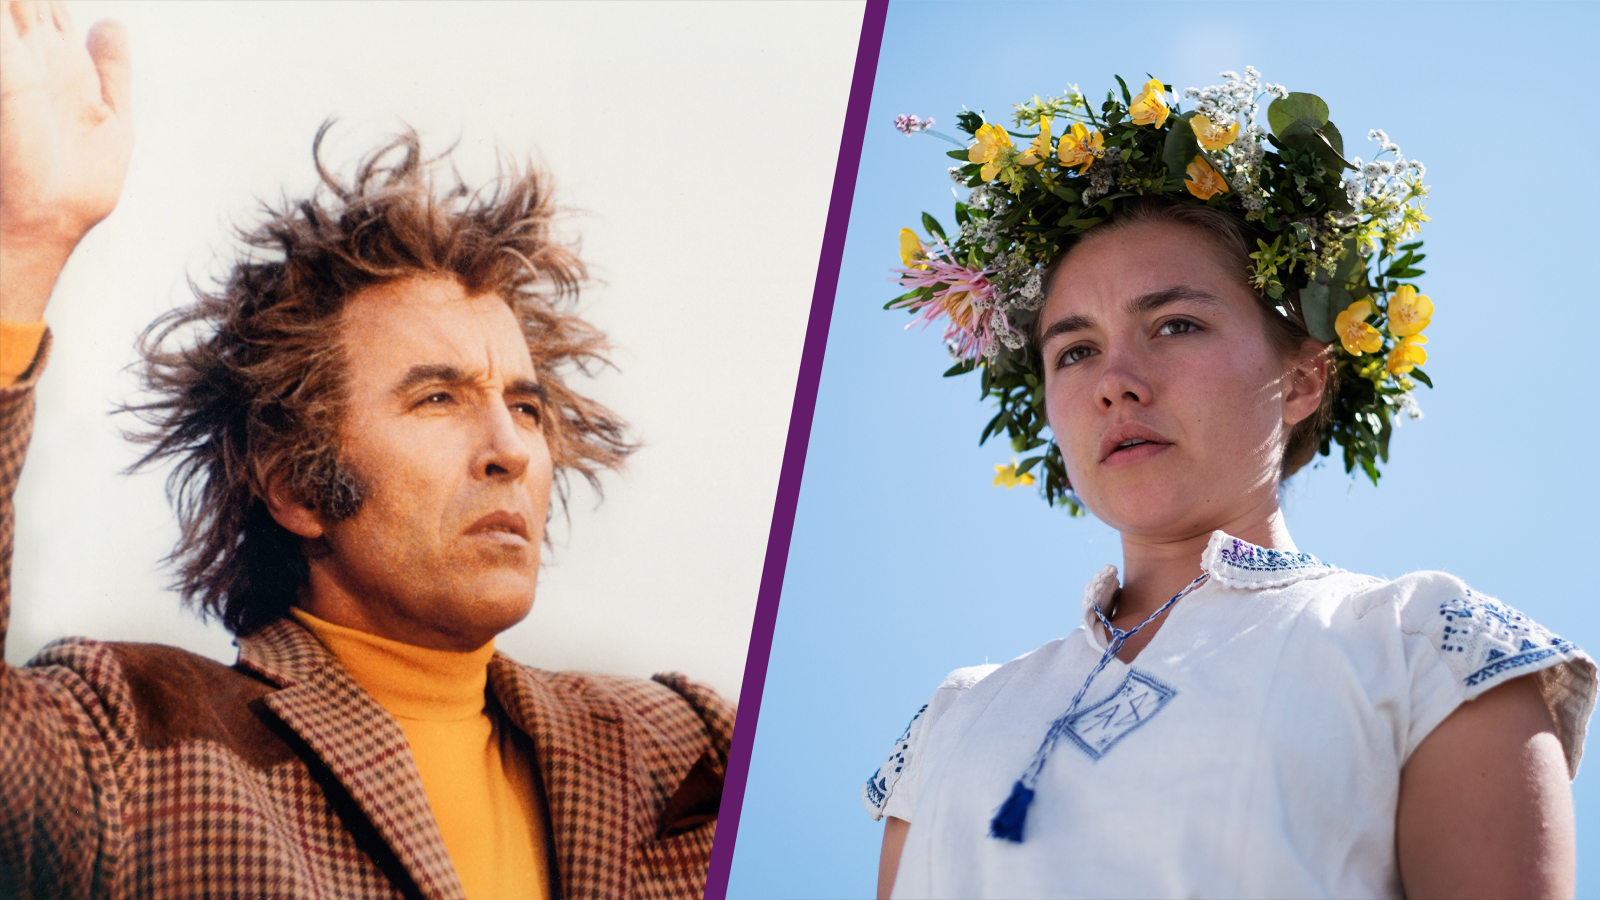 Summer Sacrifice in the Rocky Woods: The Wicker man and Midsommar